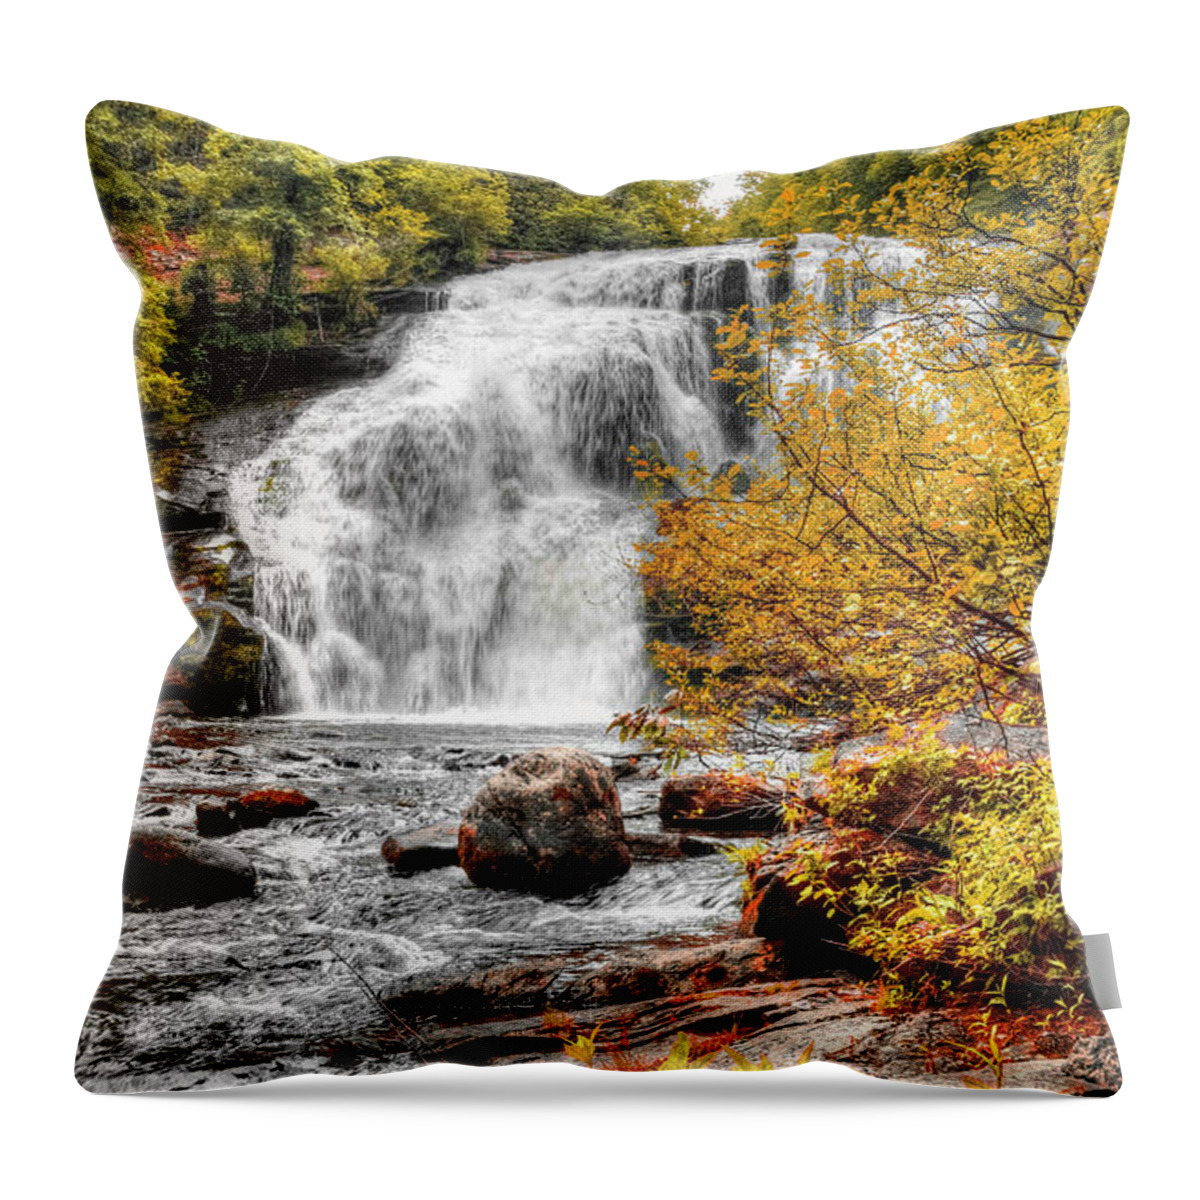 Waterfalls Throw Pillow featuring the photograph Autumn At Bald River Falls by Randall Dill